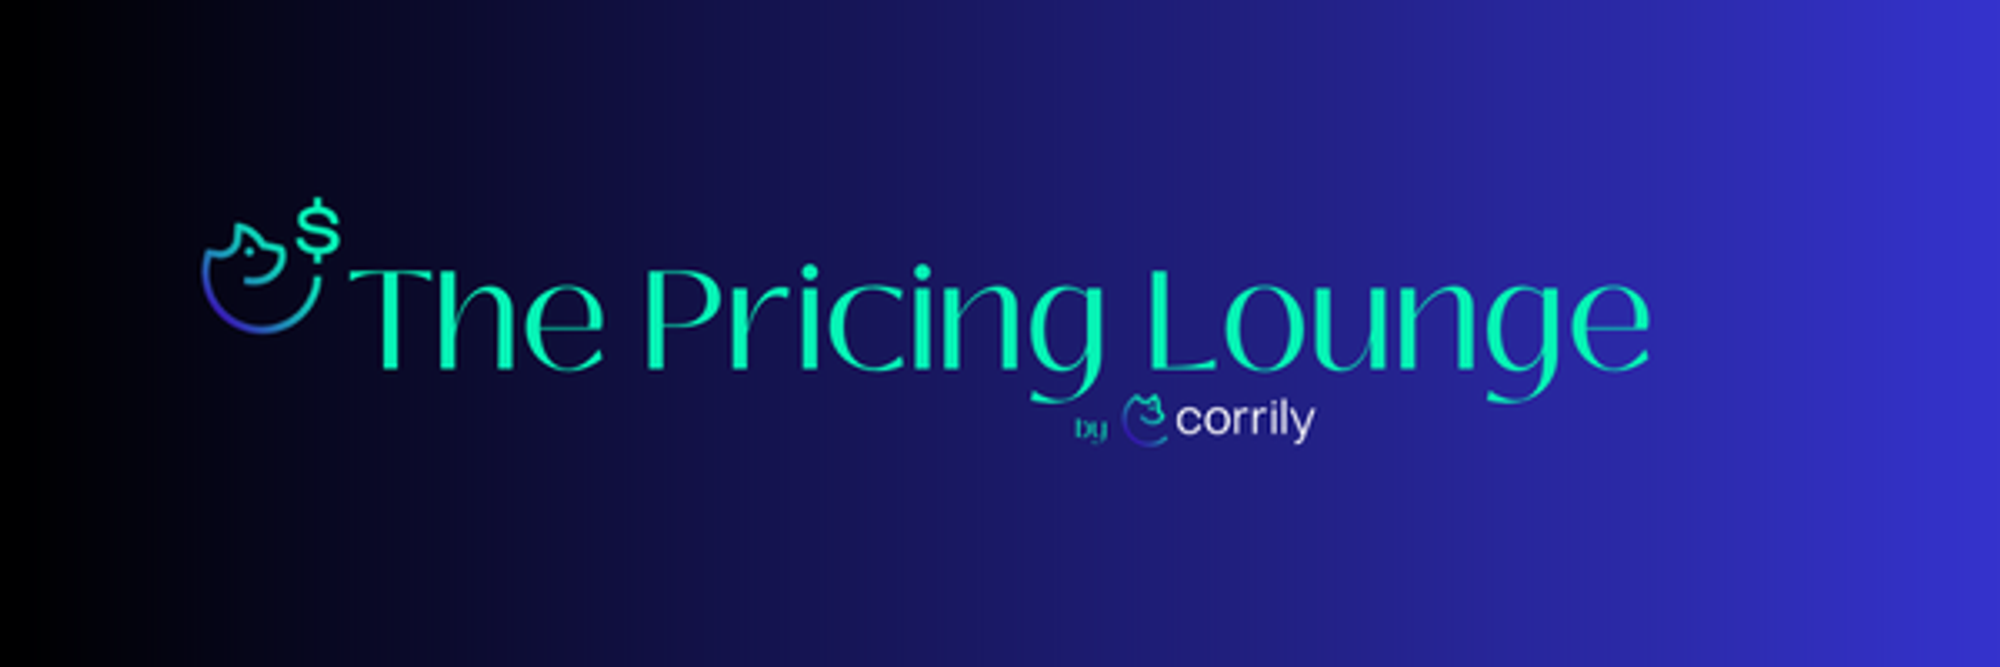 The Pricing Lounge banner.png